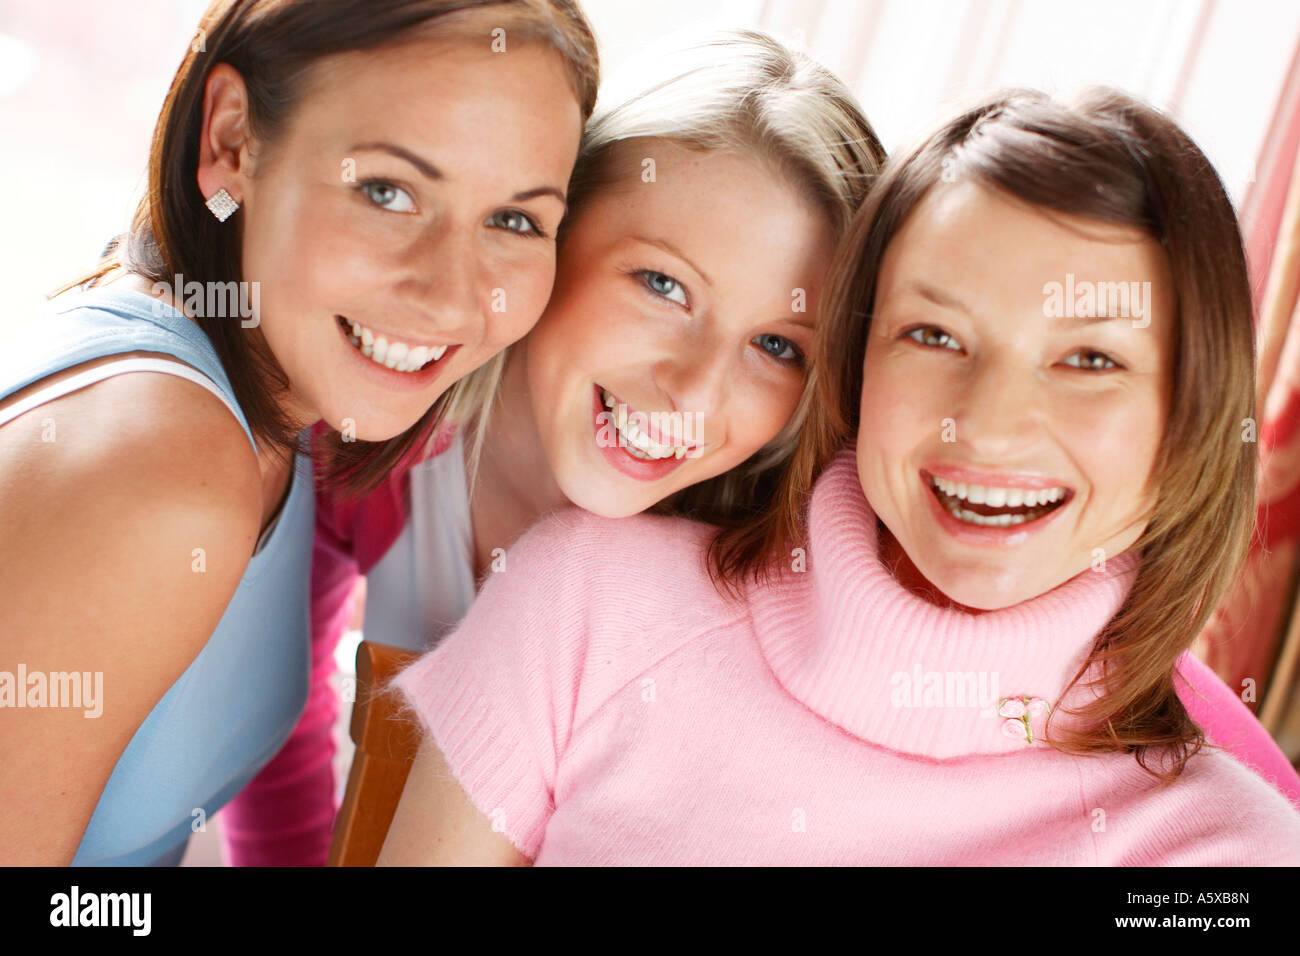 Portrait of 3 girls laughing Stock Photo